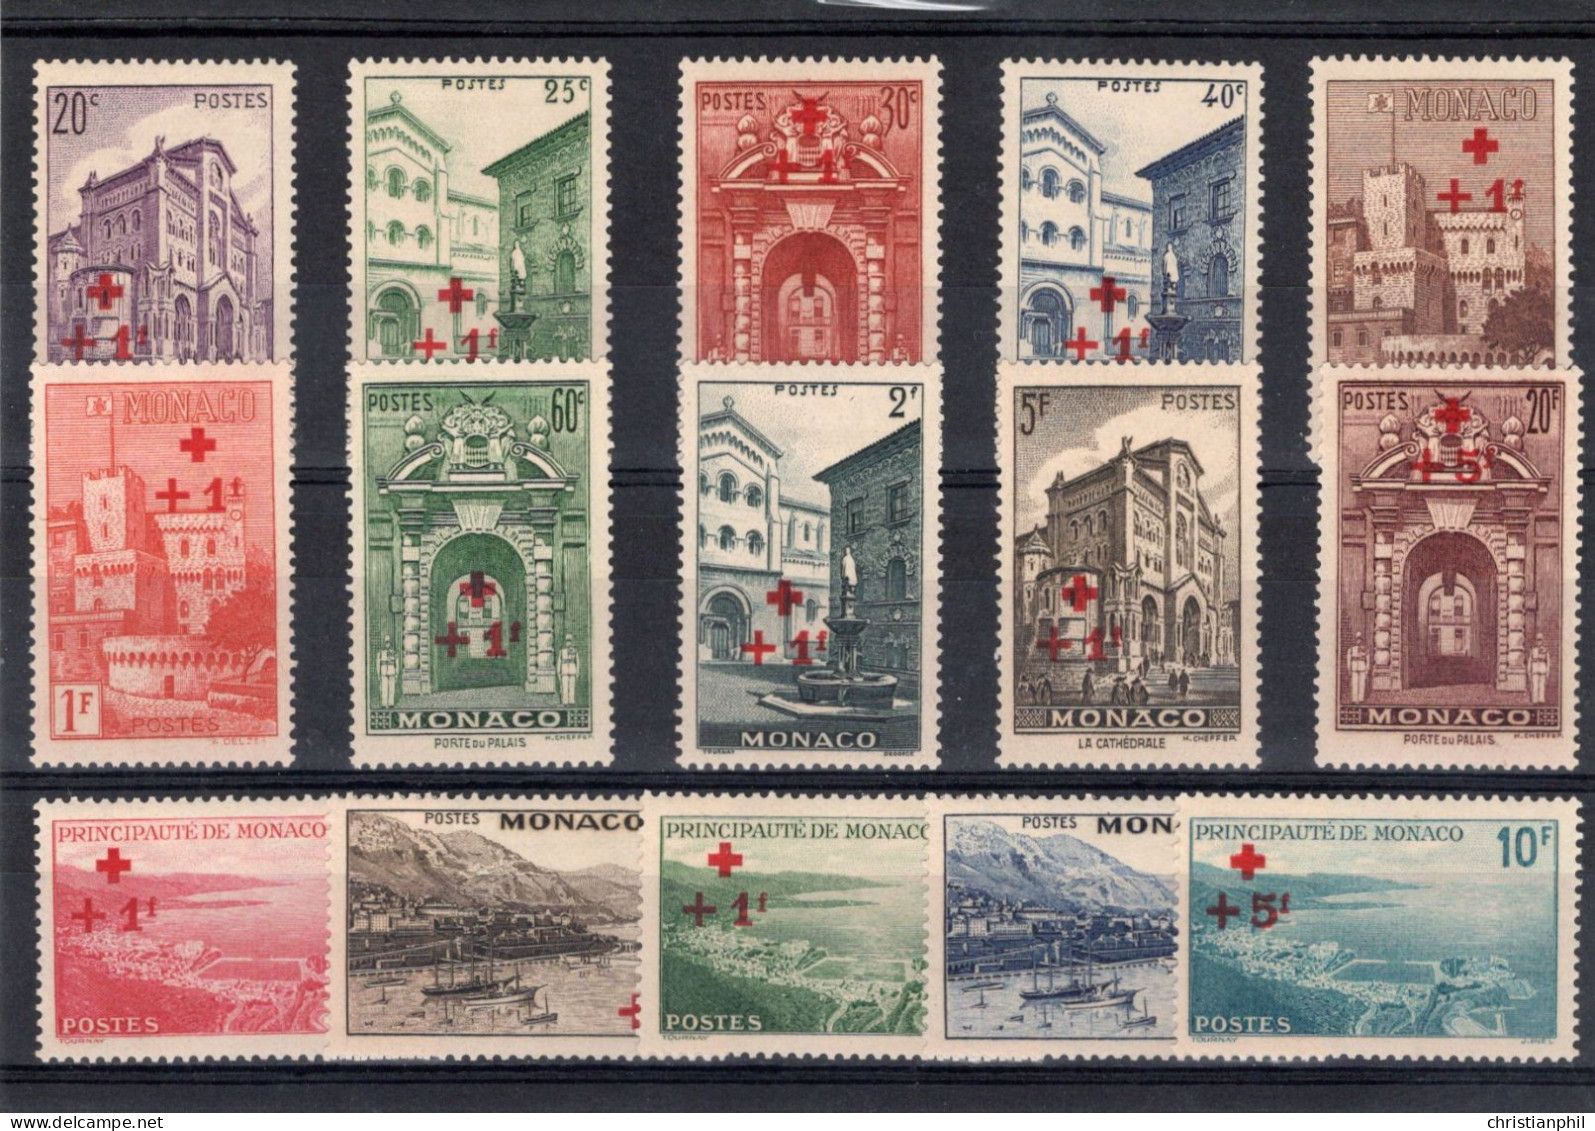 TIMBRES MONACO CROIX-ROUGE  . ANNEE 1940   N° 200 à 214. NEUF * - Unused Stamps